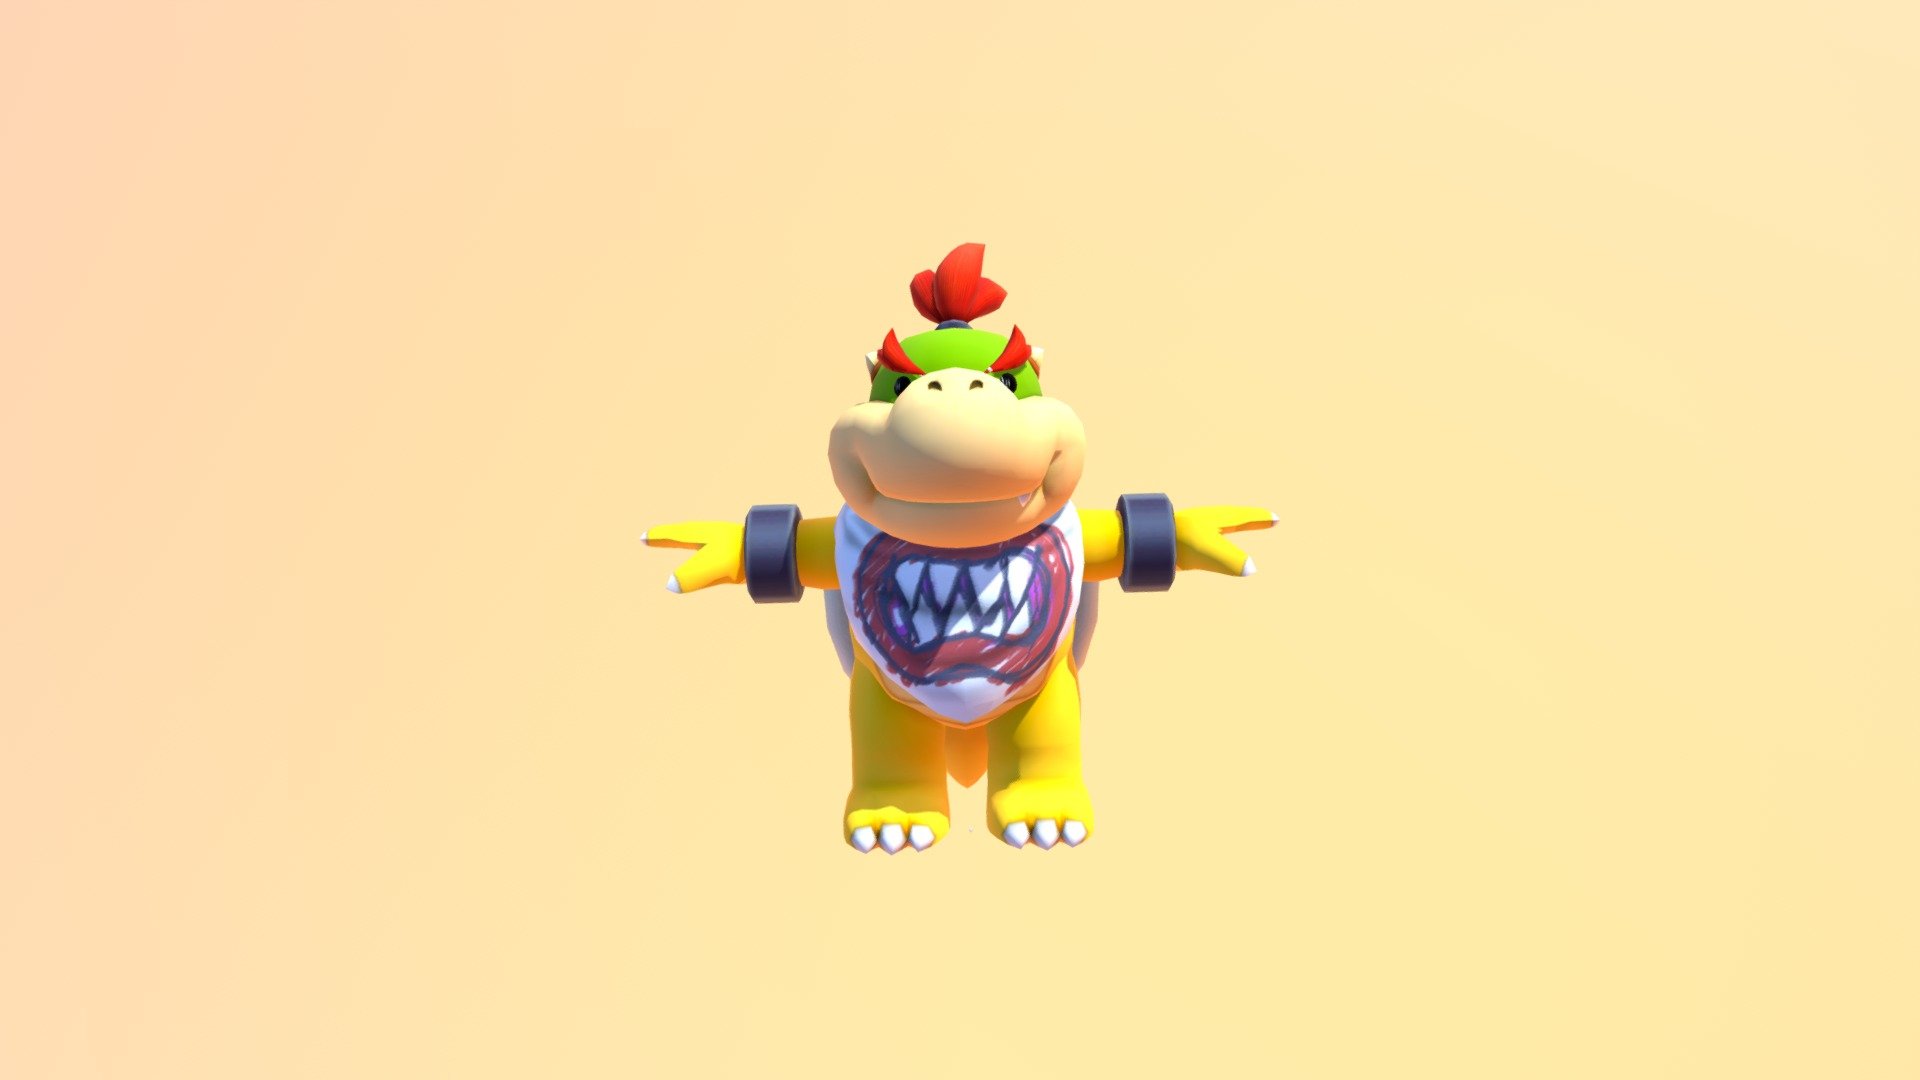 Nintendo Switch - Super Mario Party - Bowser Jr. - The Models Resource